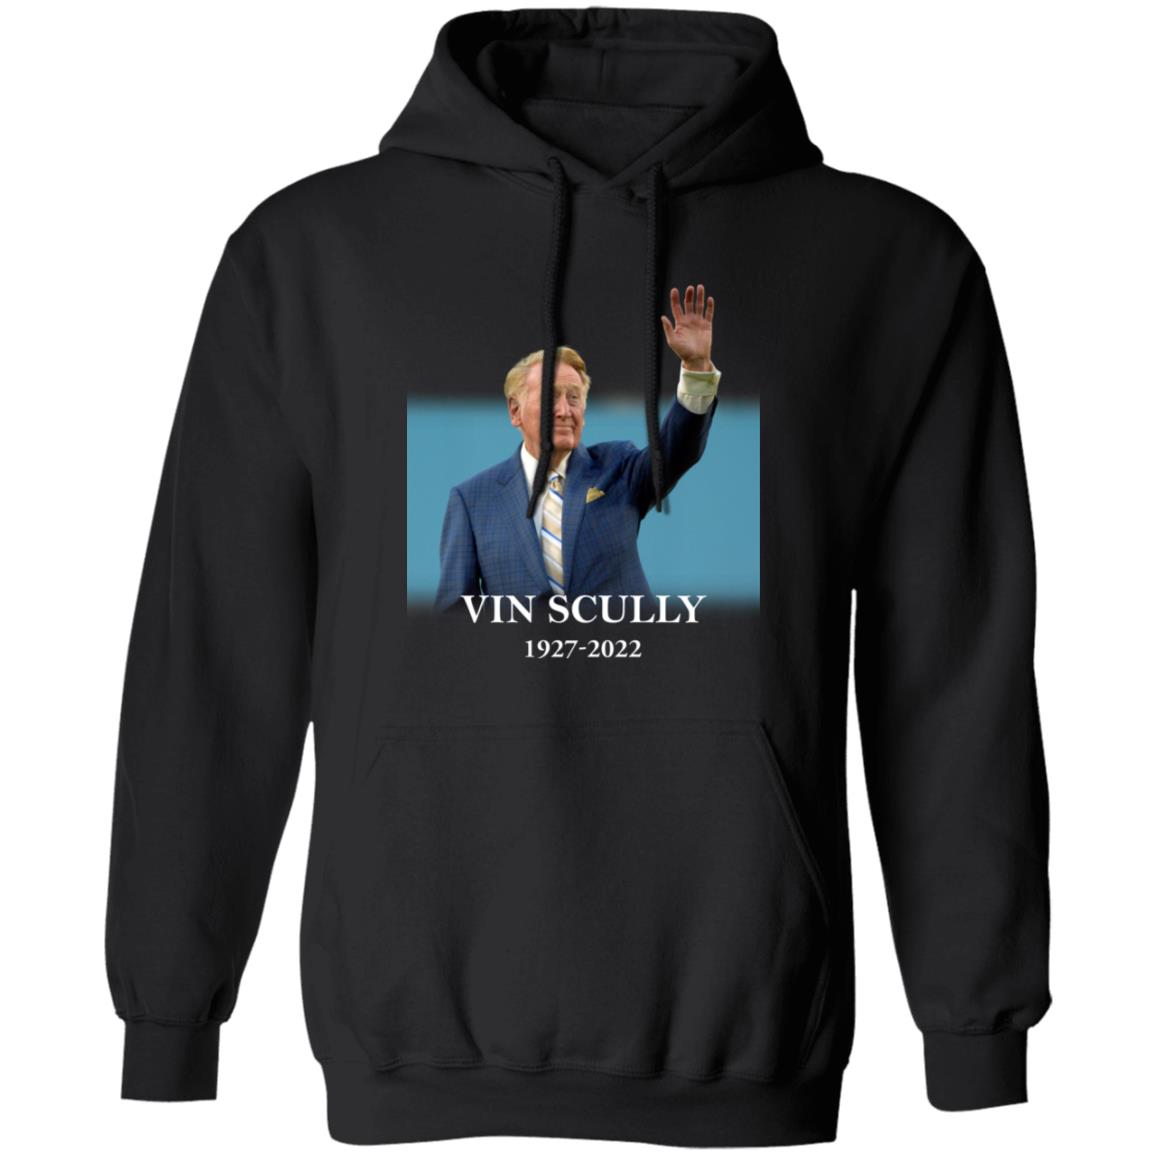 Vin Scully 1927-2022 Shirt 1